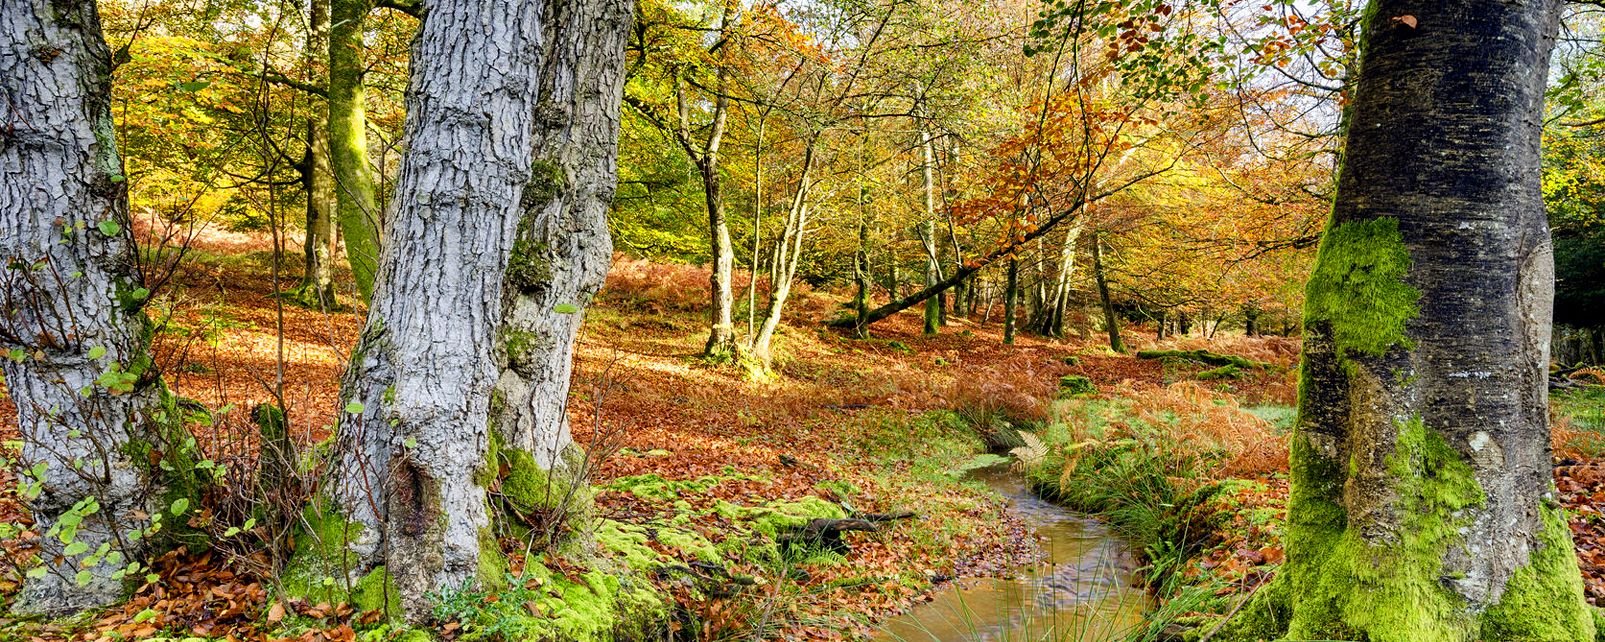 The New Forest - England - United Kingdom